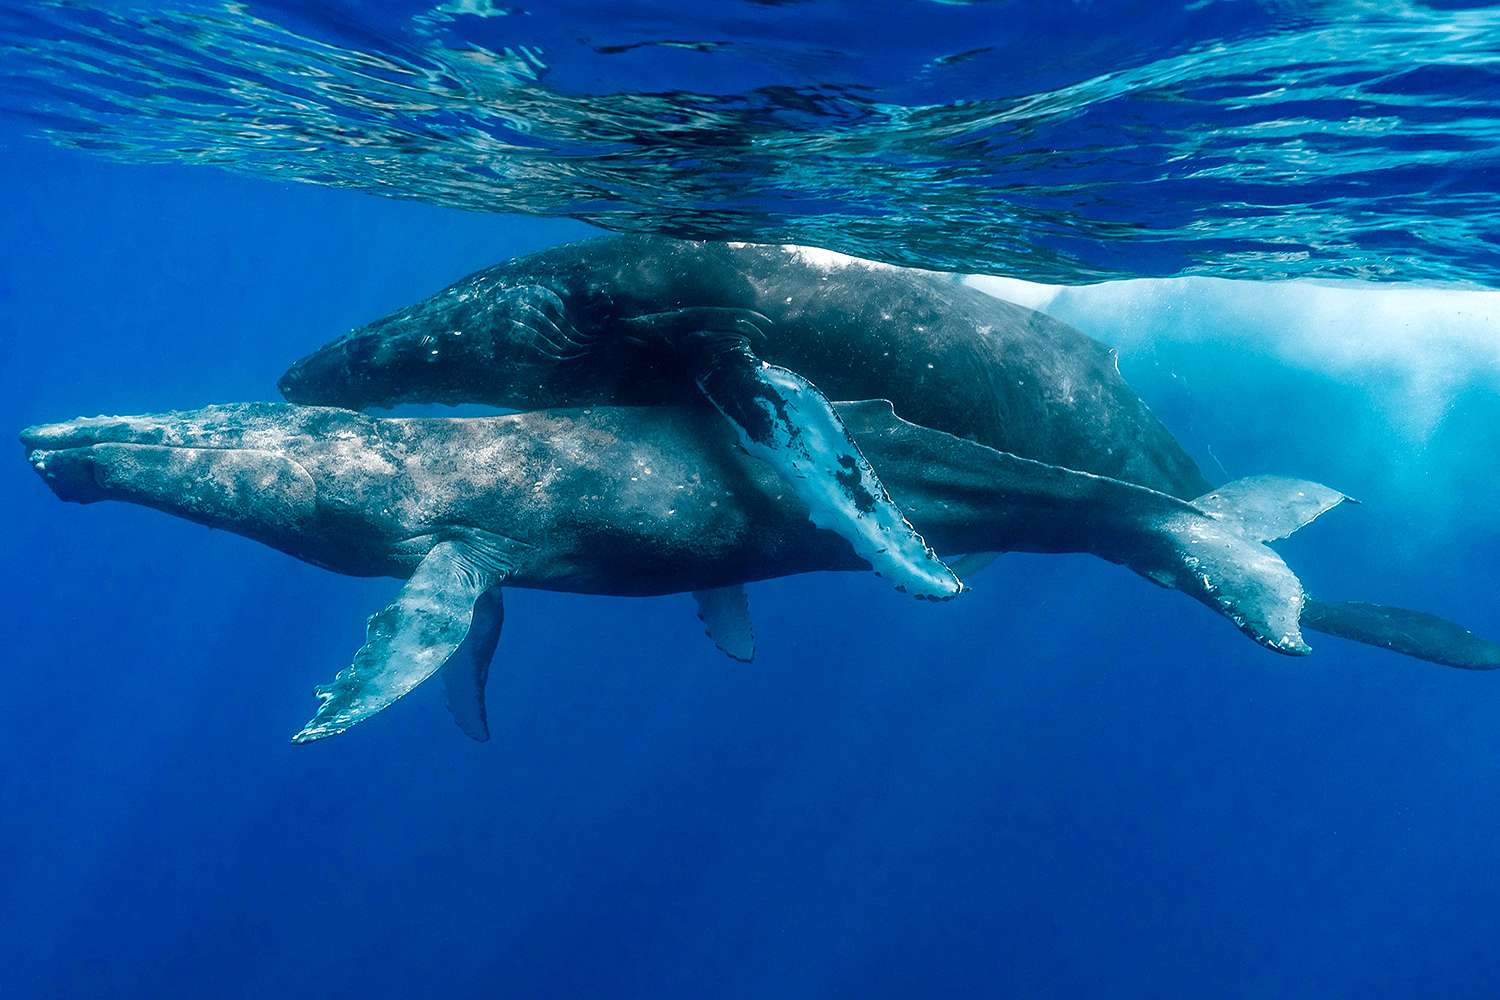 Two male humpback whales copulating for the first time ever 030124 2 0698eb7959b244ce8736bce5c331c7fb